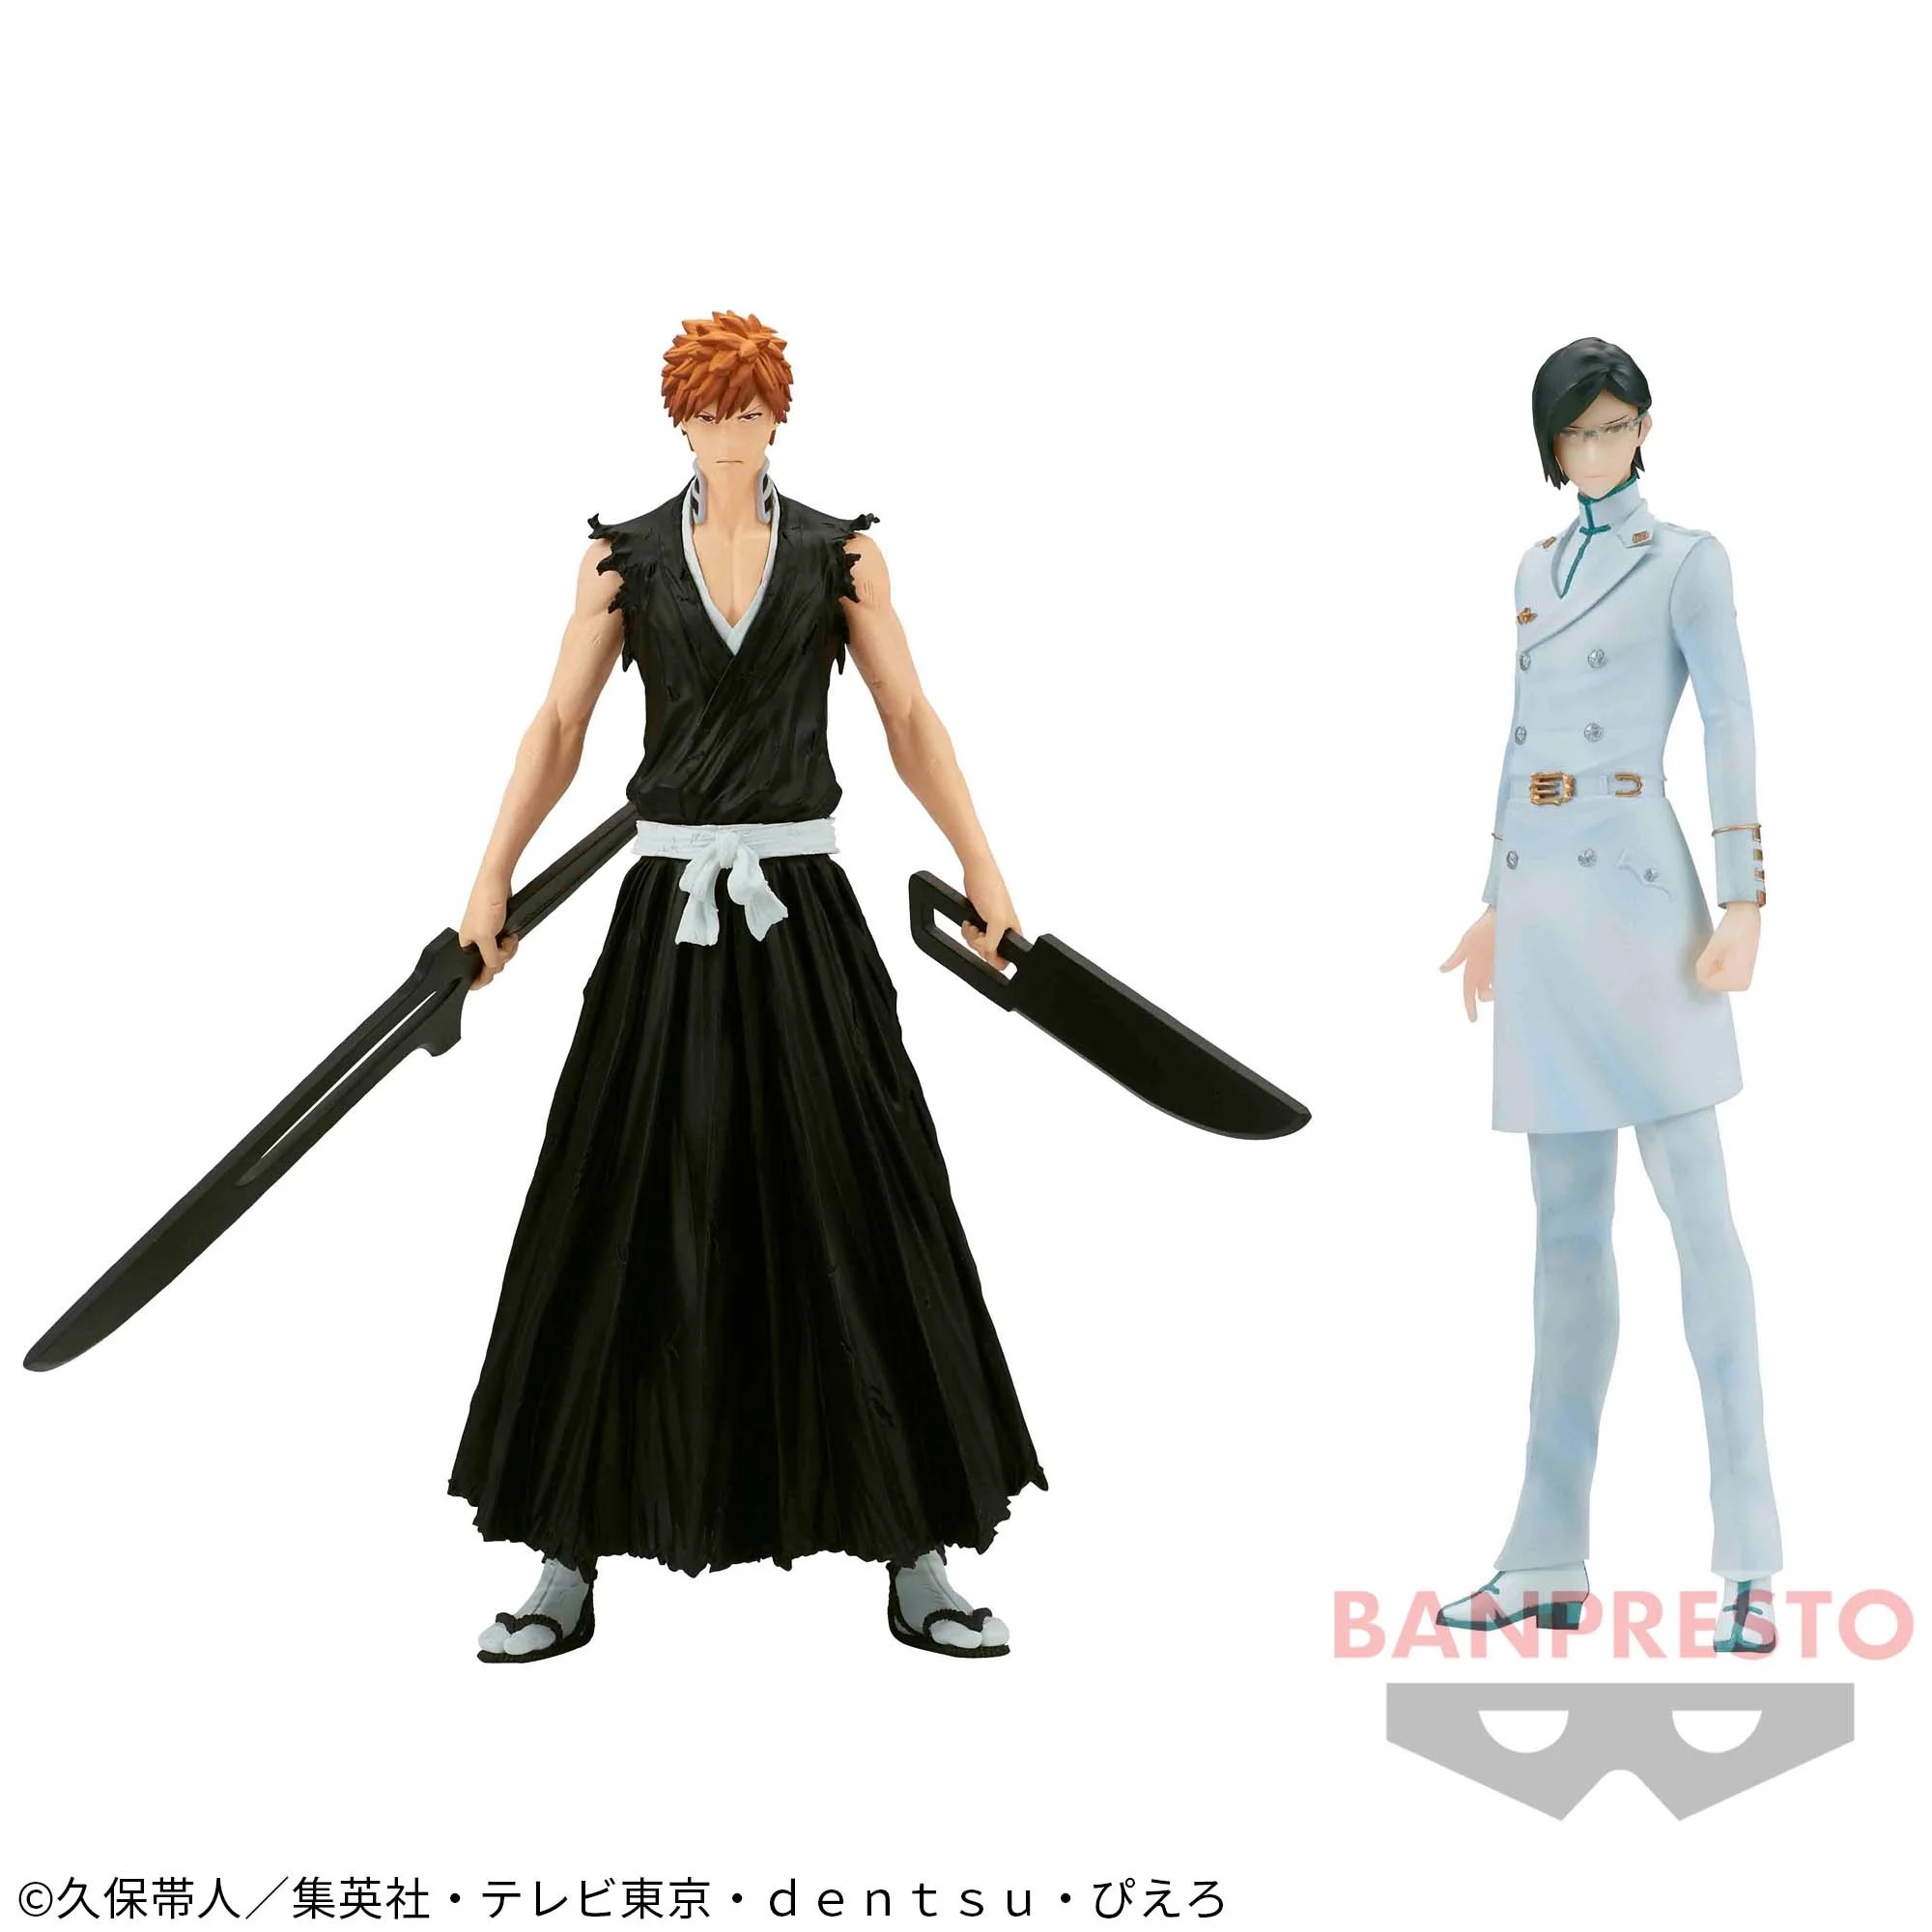 BLEACH SOLID AND SOULS-黒崎一護＆石田雨竜-